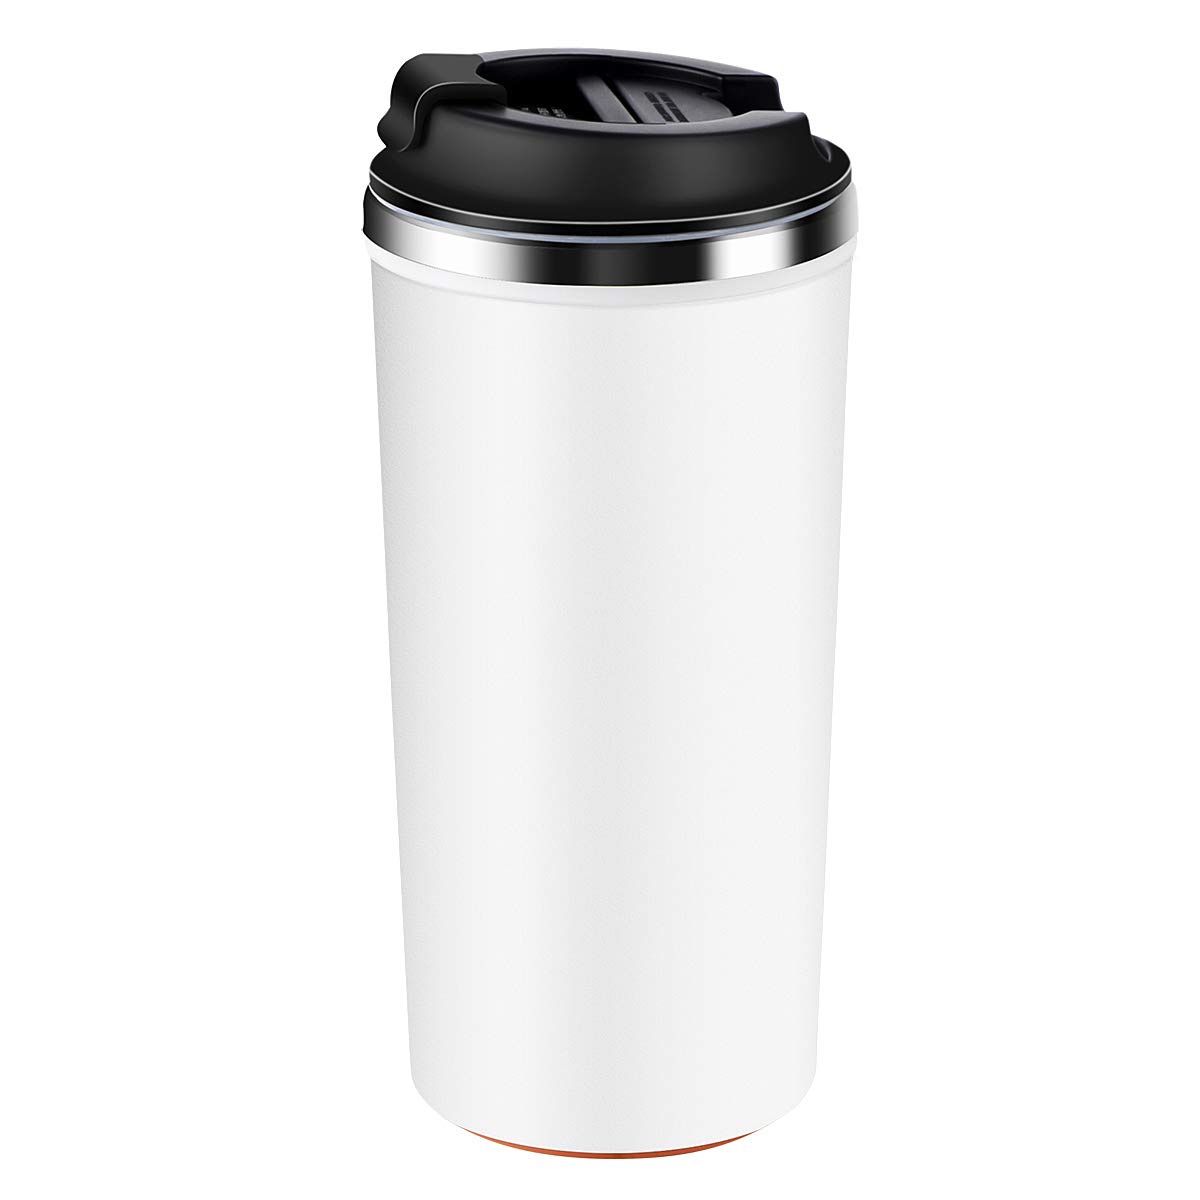 ETROBOT Coffee Tumbler, Stainless Steel Coffee Cup Wall Vacuum Reusable Office Coffee Mug That Won't Fall Over Great for Home, Office, Outdoor Works